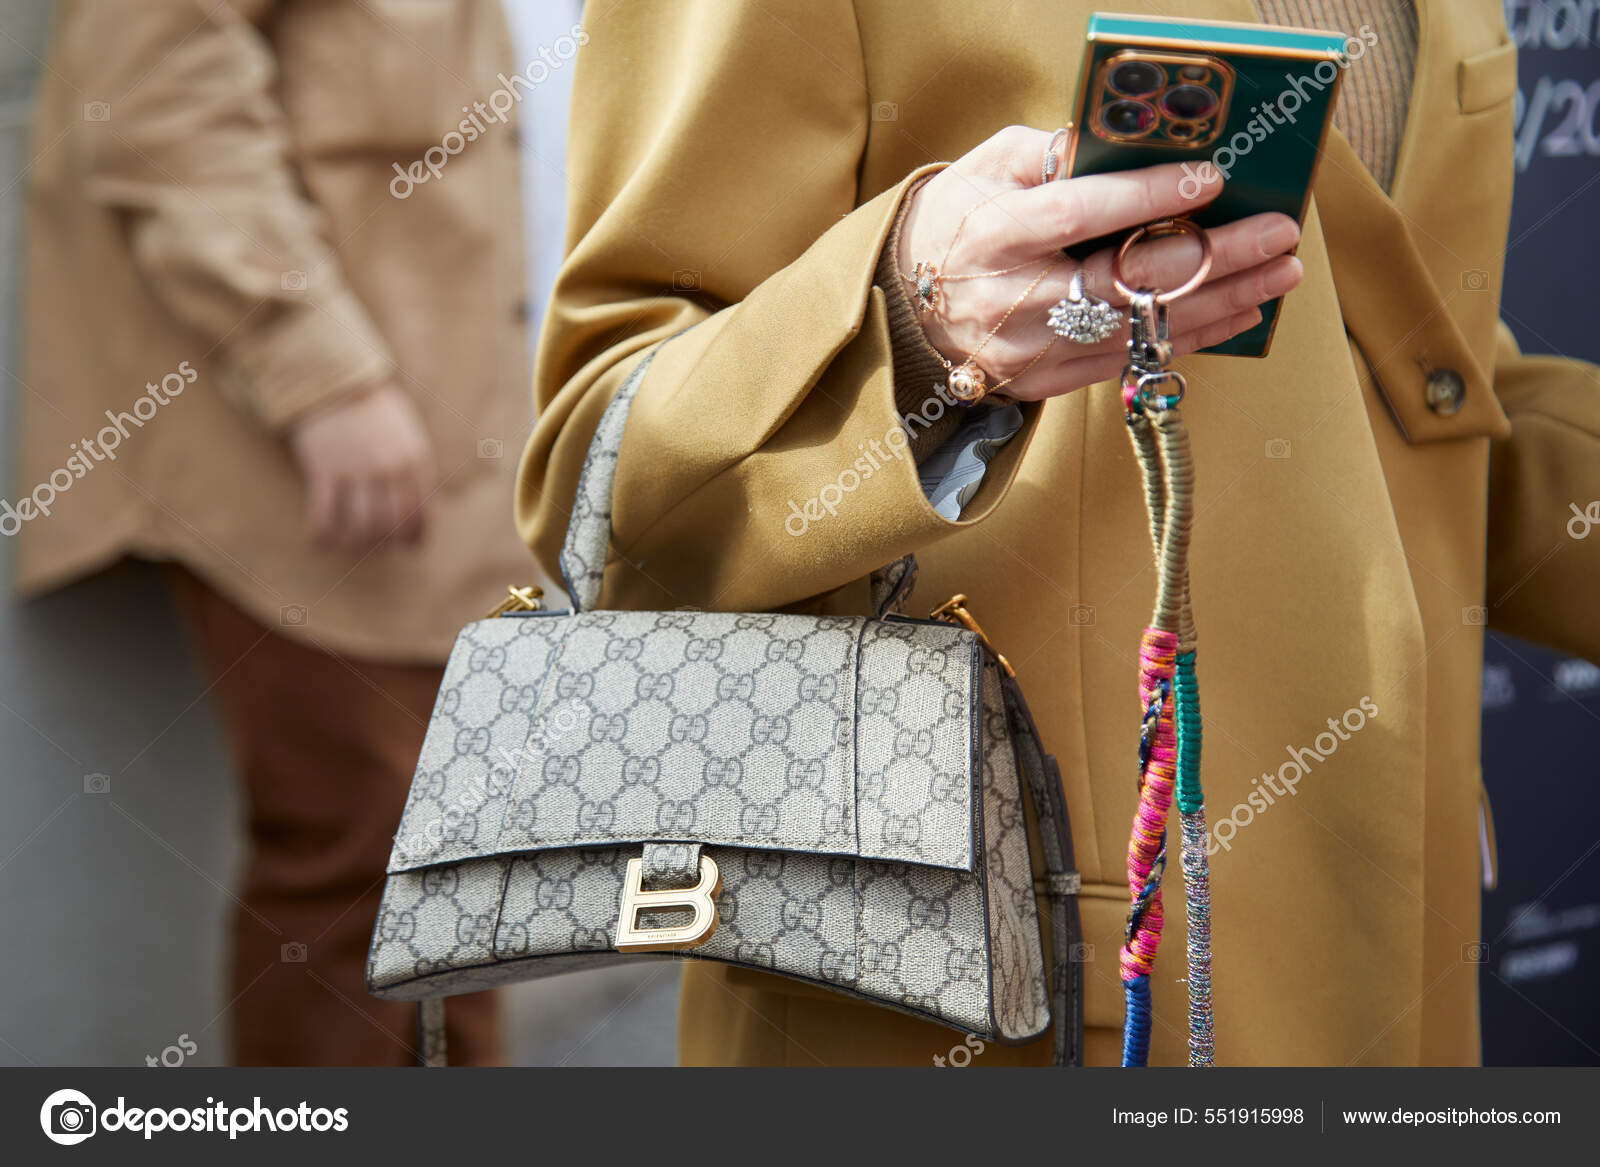 MILAN, ITALY - FEBRUARY 23, 2022: Man with Gucci bag, backpack and